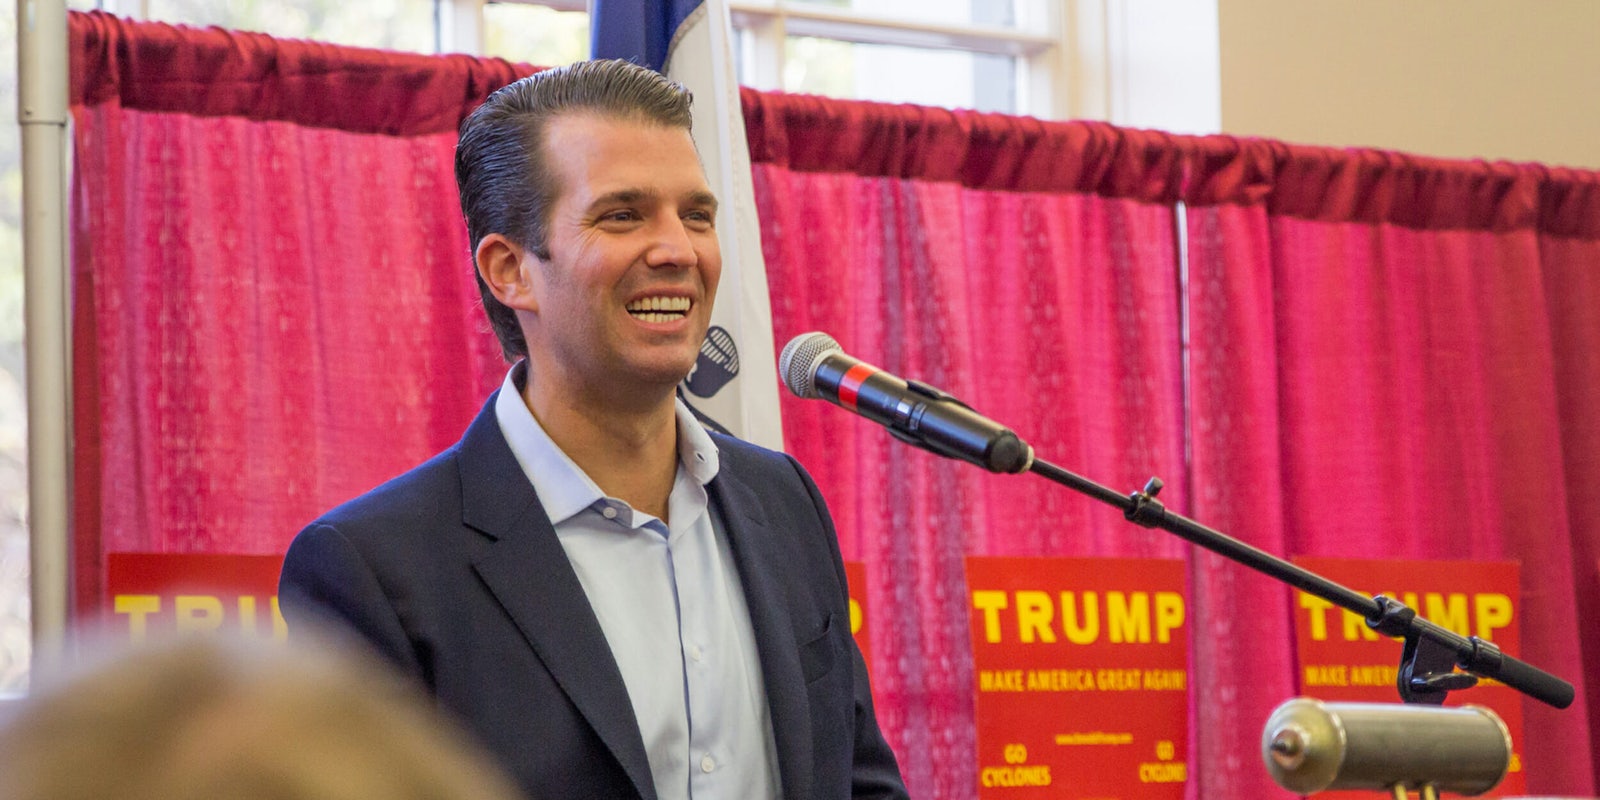 Donald Trump Jr. stirred conspiracy theories that people in the 'highest levels of government' don't want to let 'America be America.'